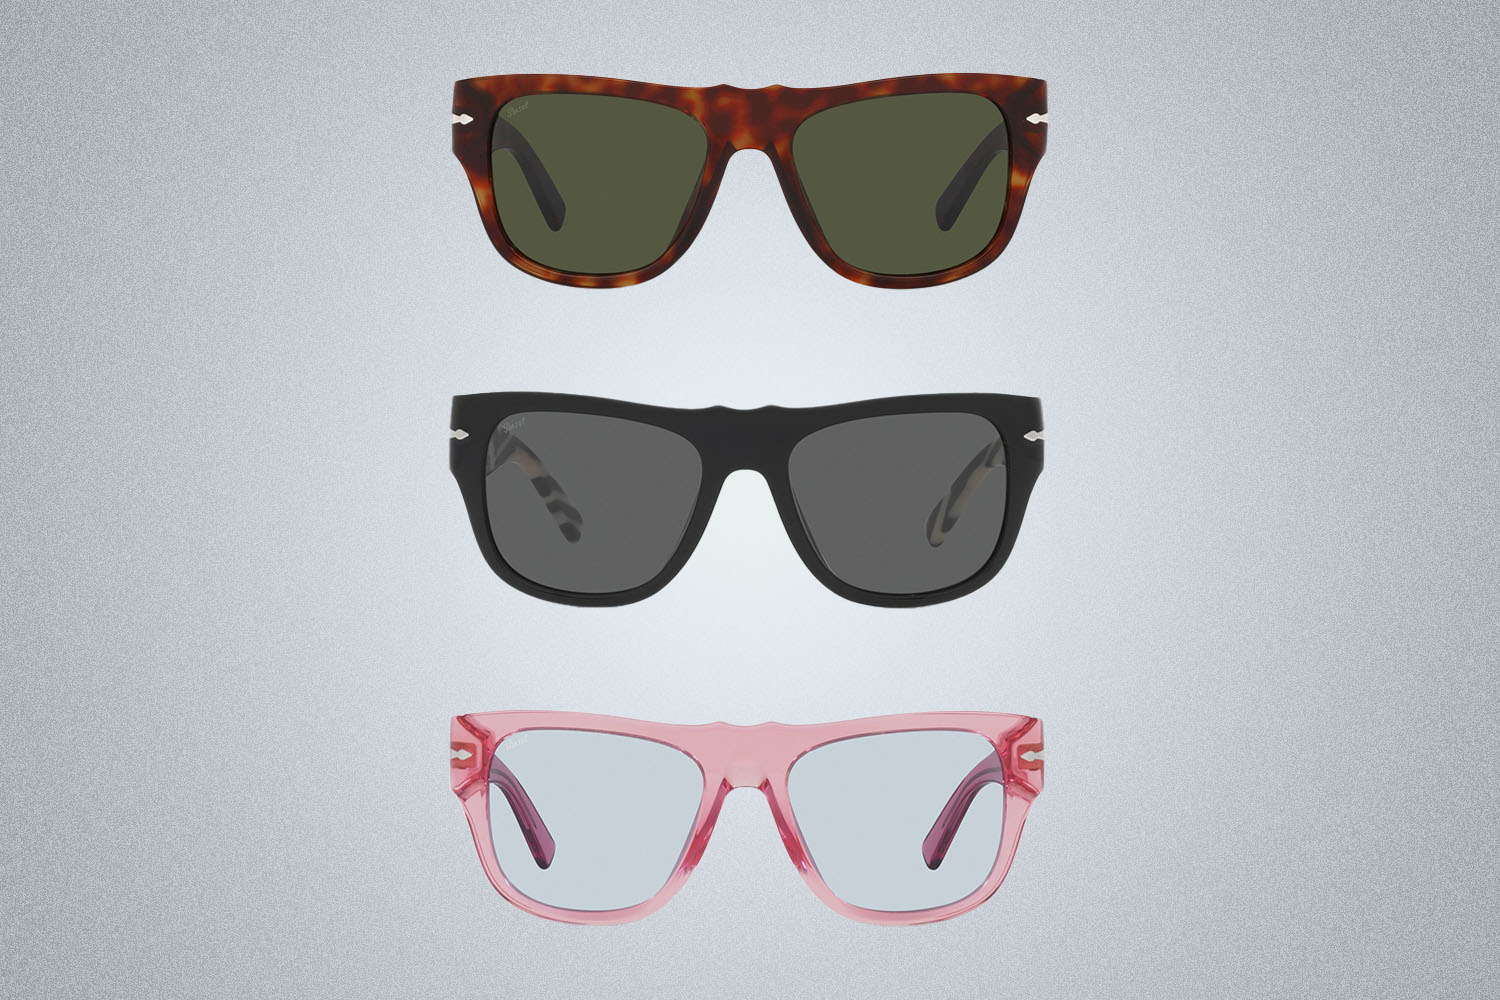 A trio of sunglasses in different colors from Dolce&Gabbana x Persol on a grey background